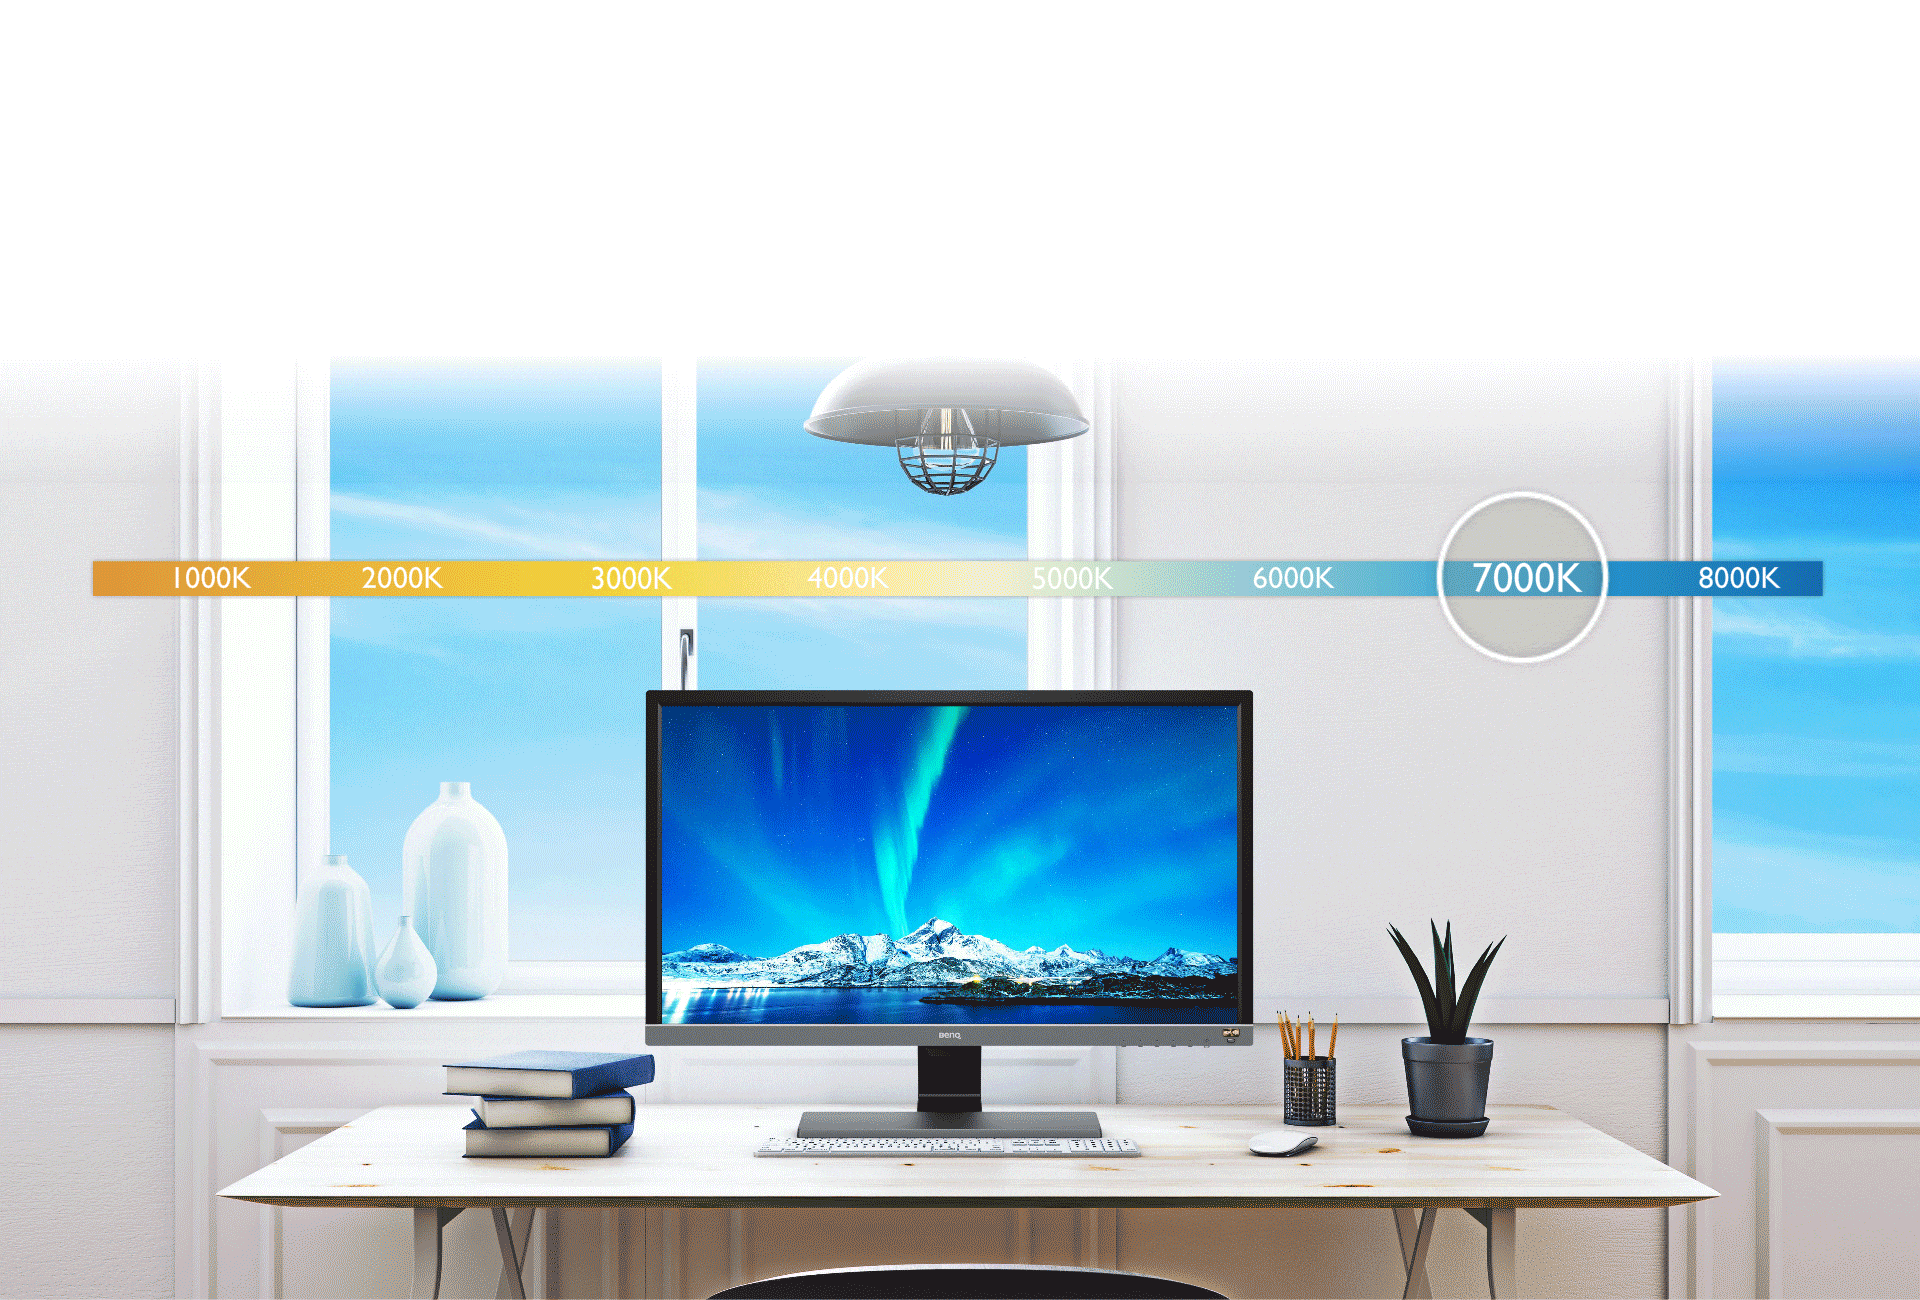 BenQ's gaming monitor EX2780Q's B.I. plus tech. is to brilliantly detect the ambient light levels and the color temperature in your viewing environment to automatically adjust on-screen brightness and color temperature for viewing comfort